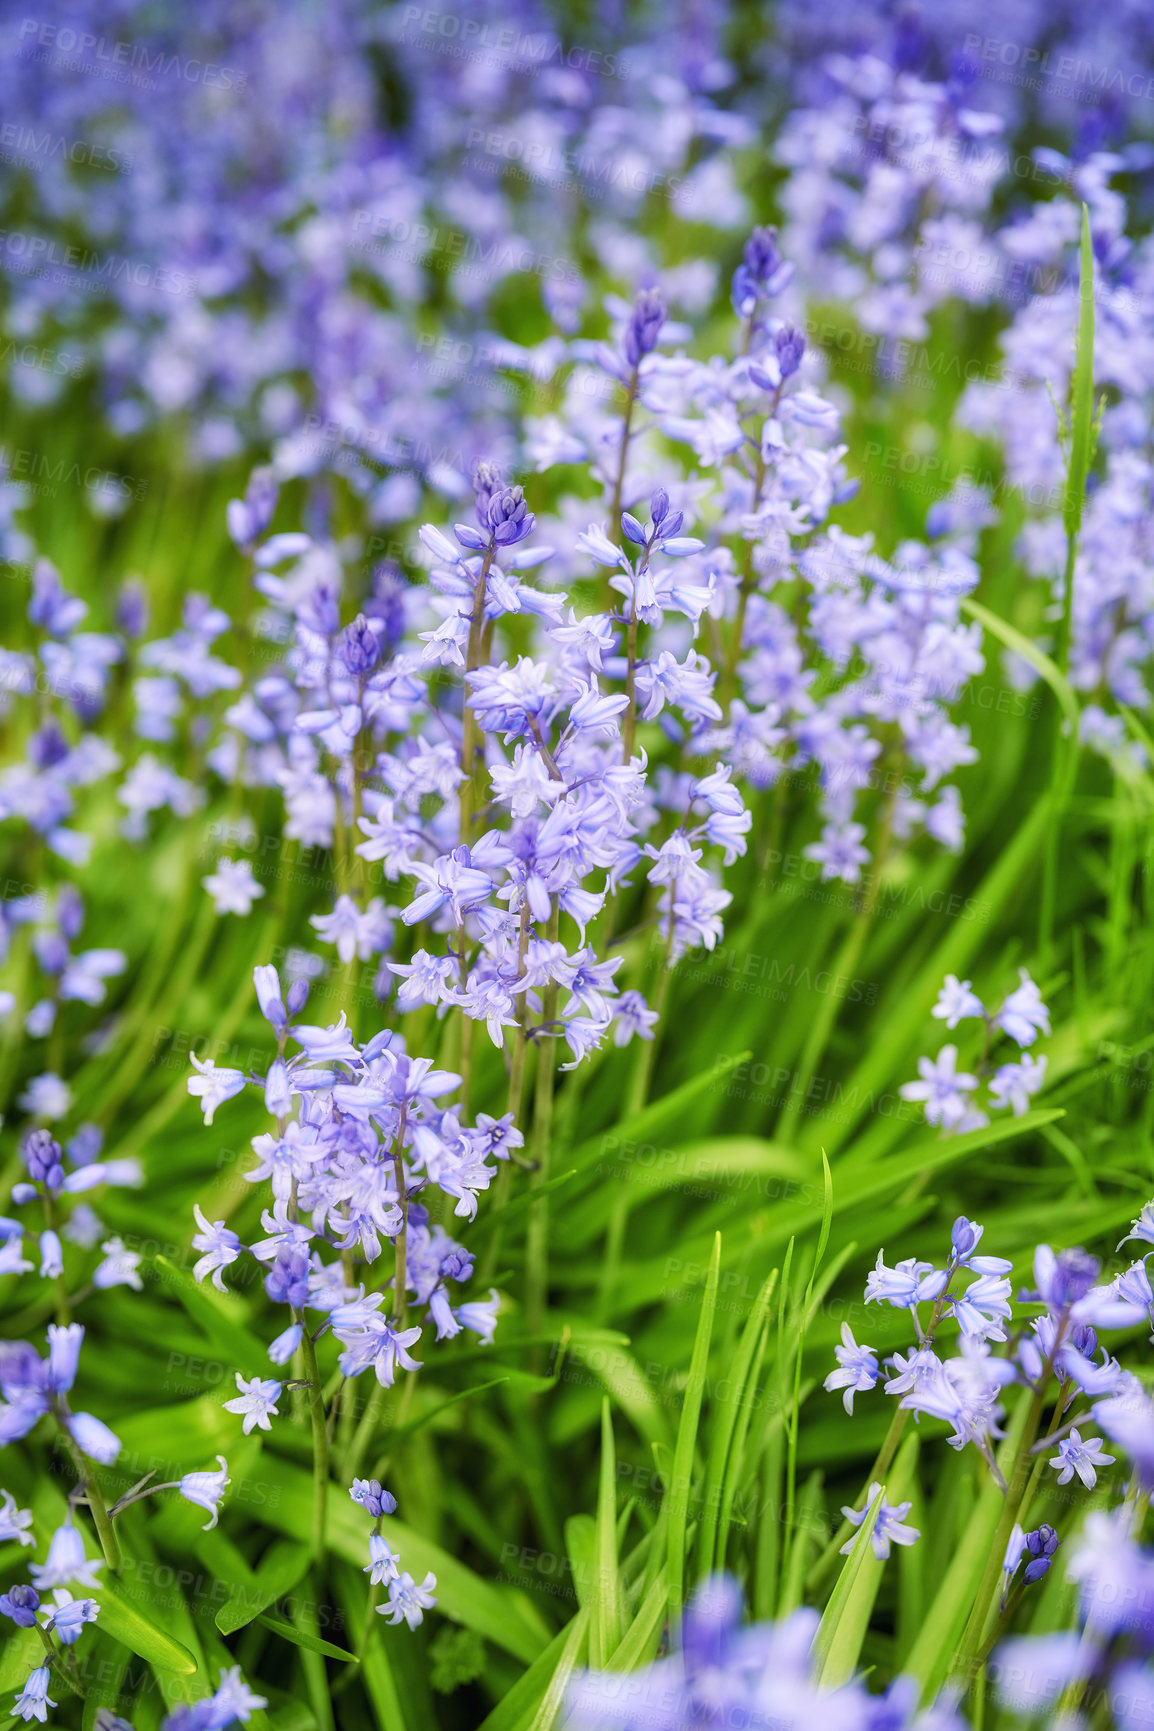 Buy stock photo Closeup of blue kent bell flowers growing and flowering on green stems in a secluded home garden. Textured detail of common bluebell or campanula plants blossoming and blooming in backyard